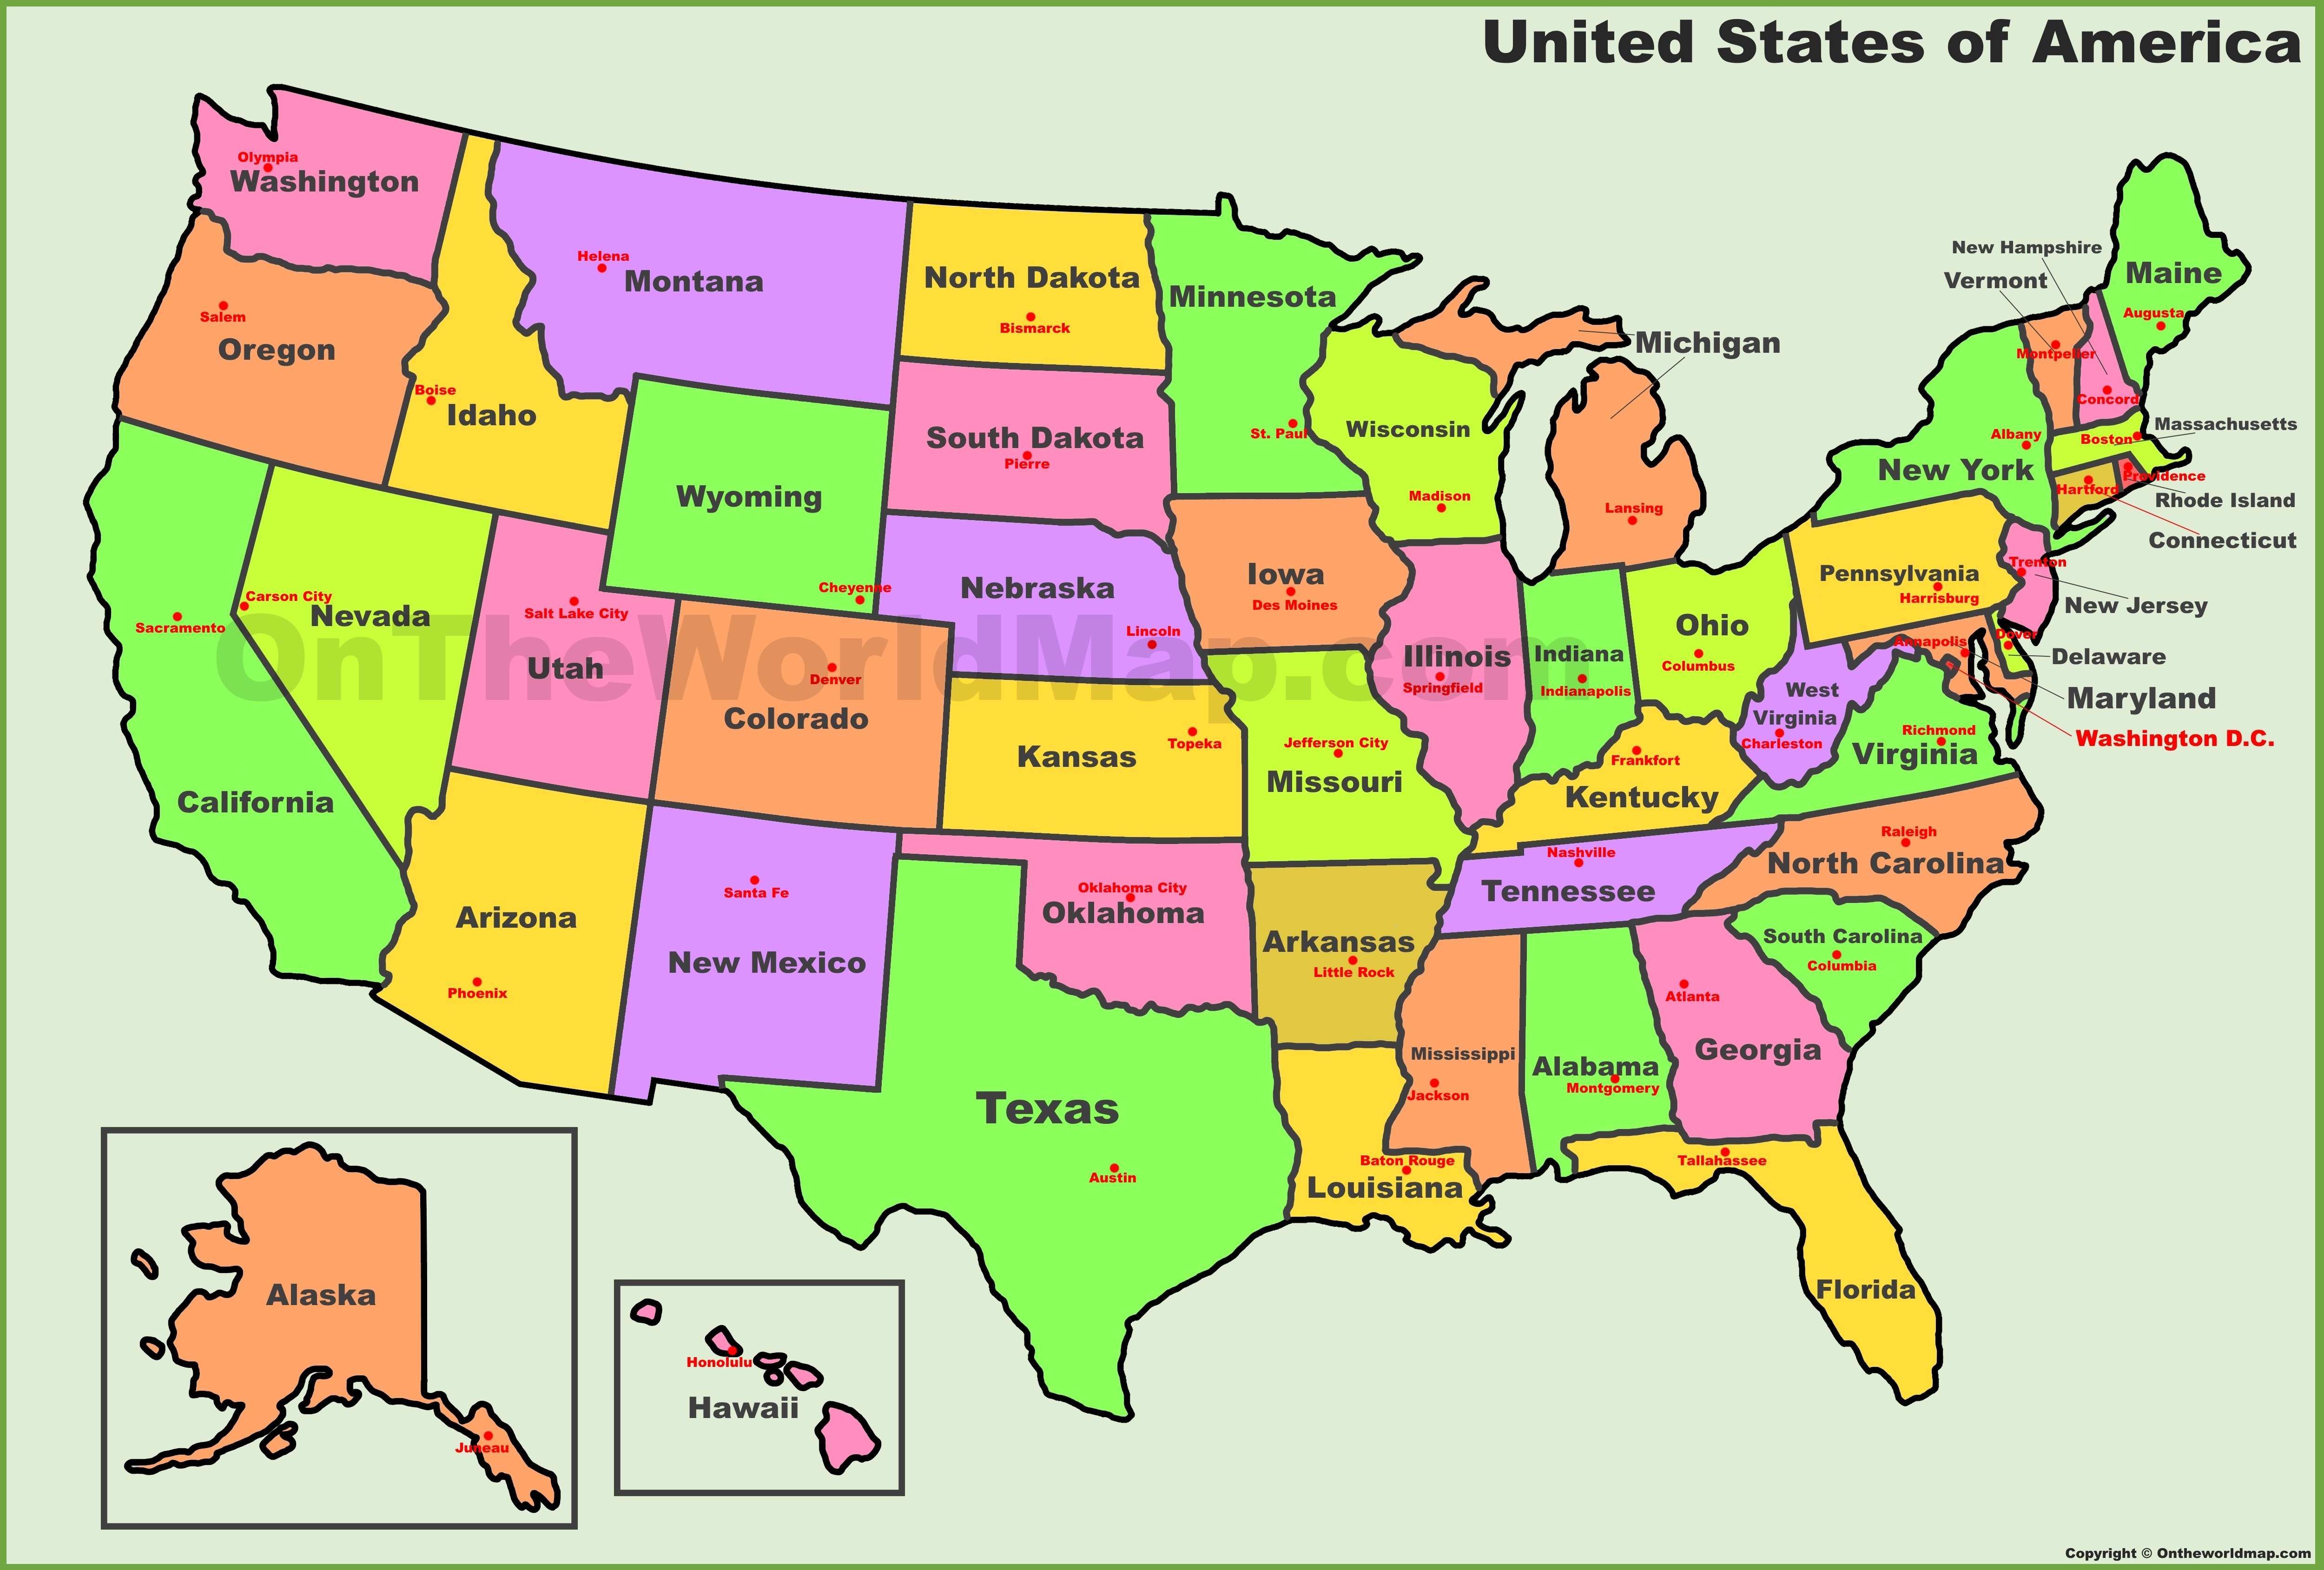 Map Of America Showing States And Capitals